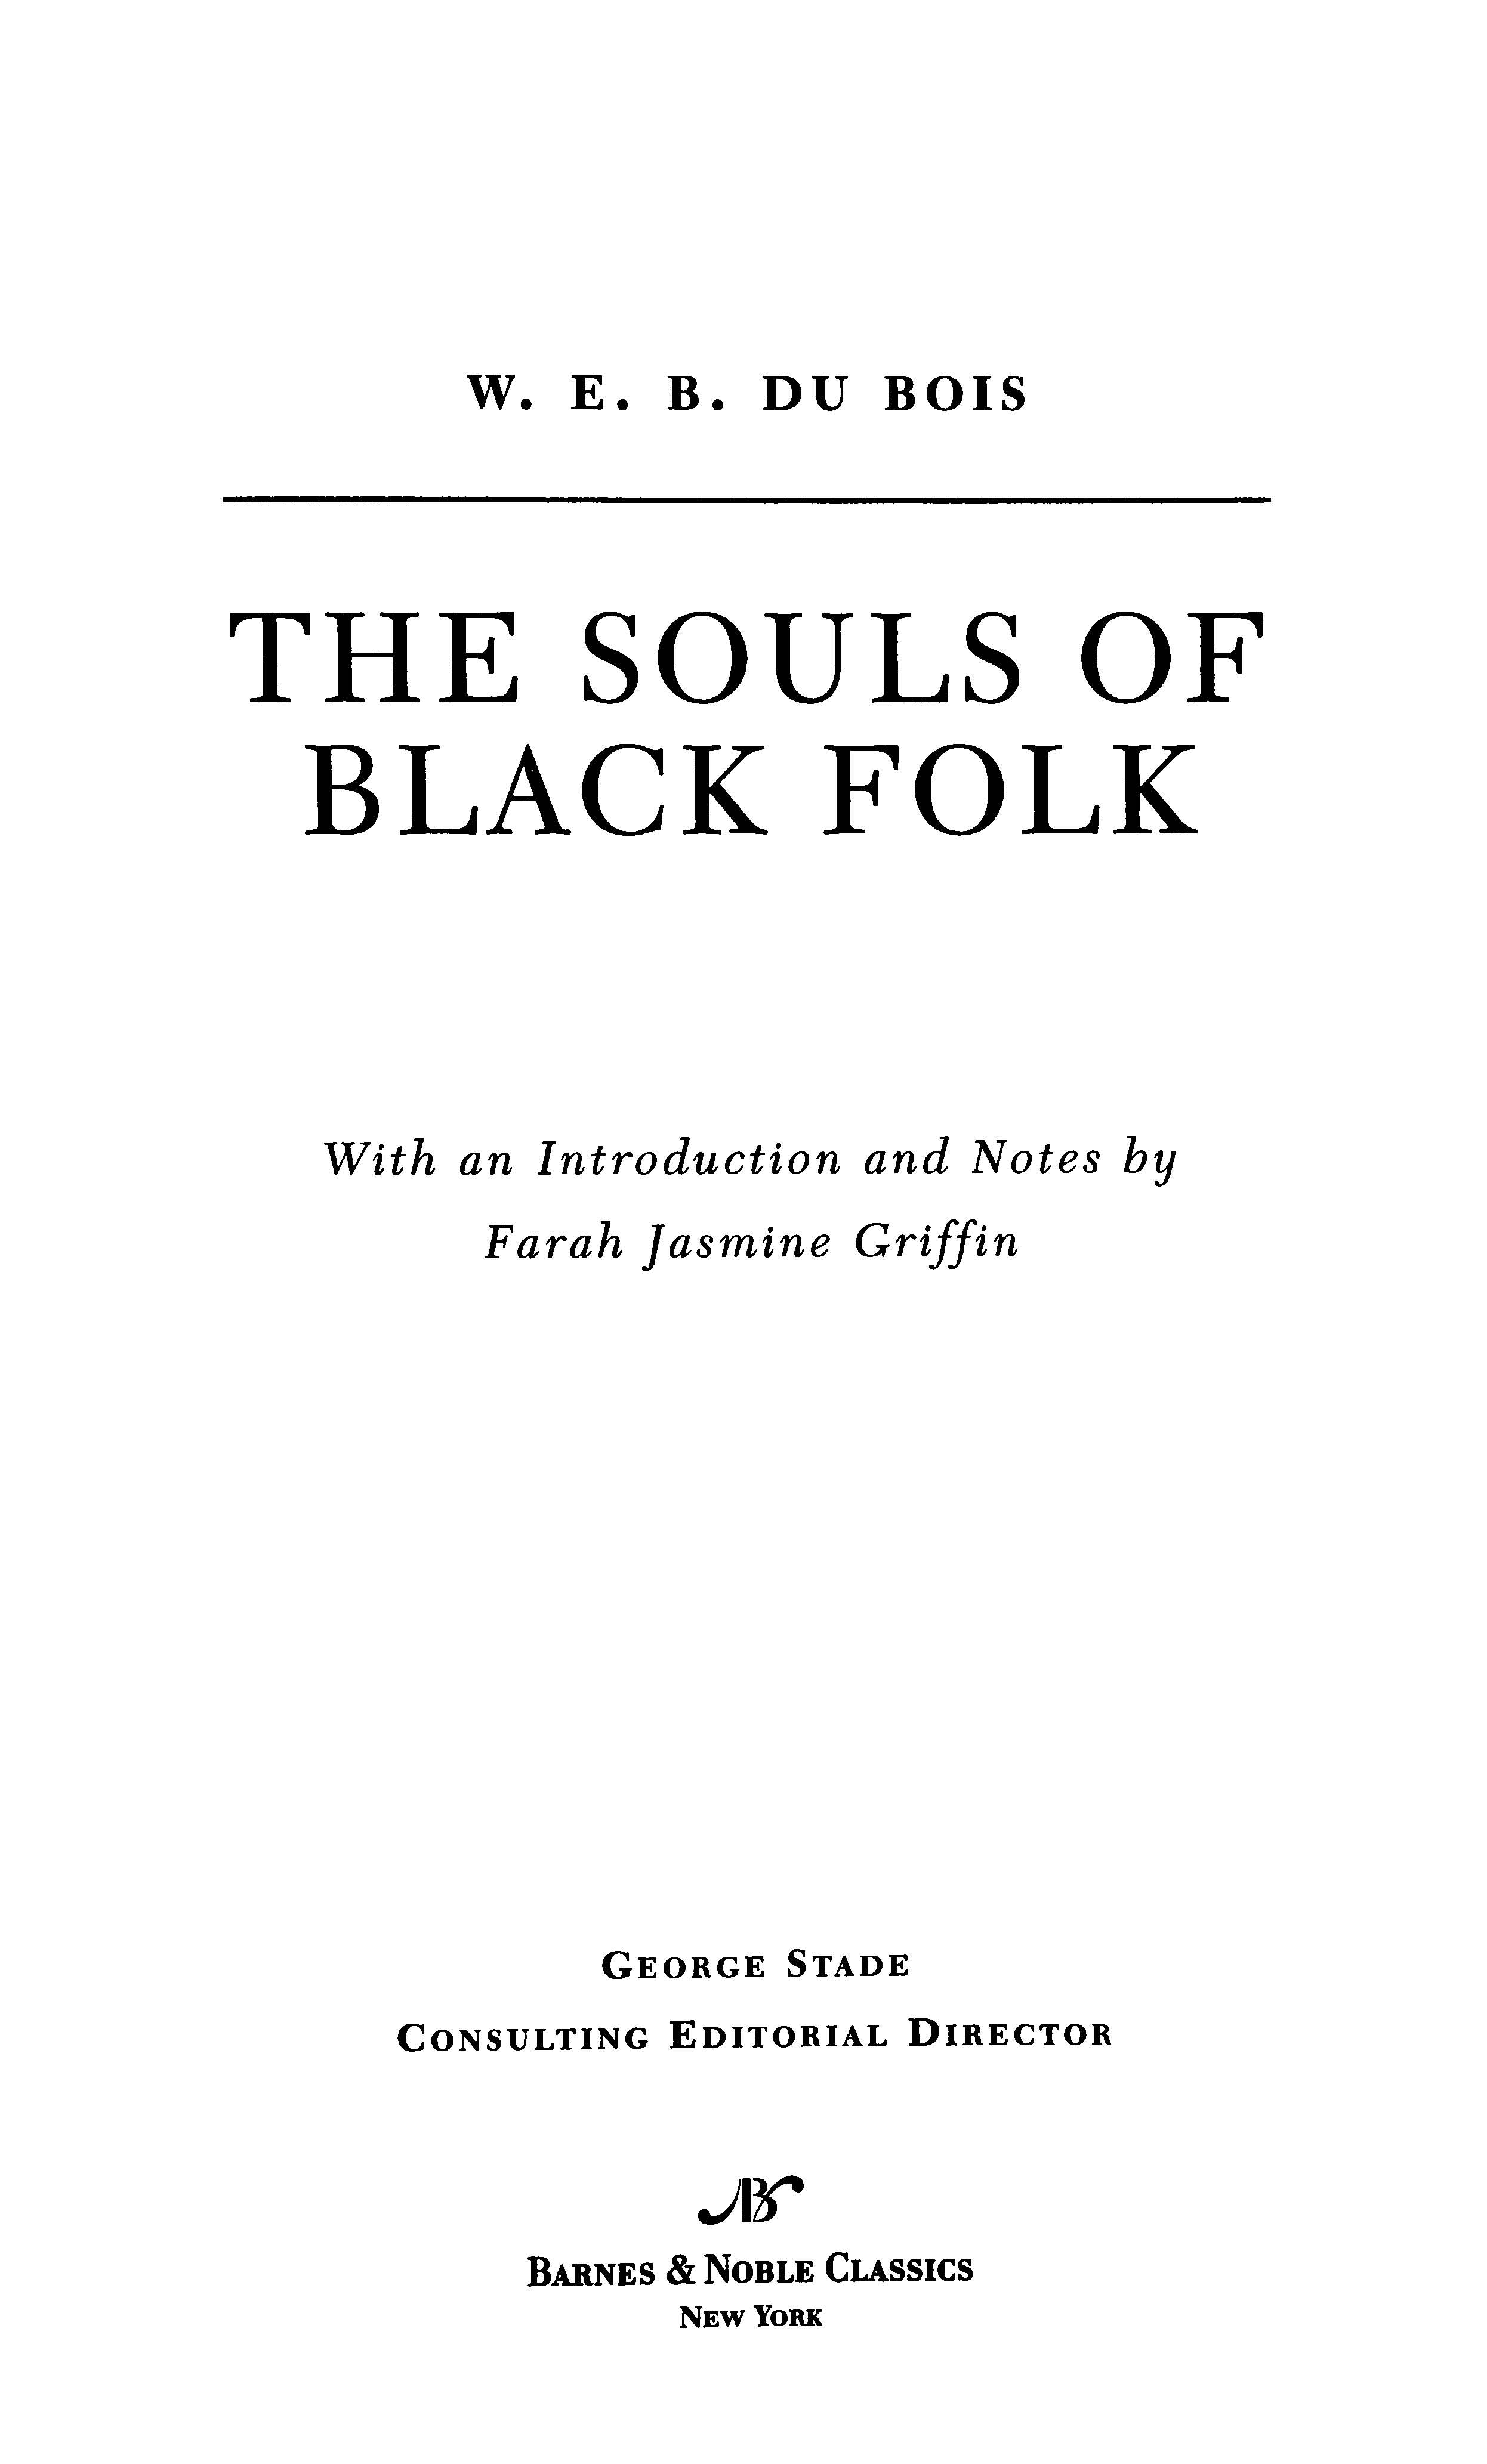 Table of Contents FROM THE PAGES OF THE SOULS OF BLACK FOLK The problem of - photo 1